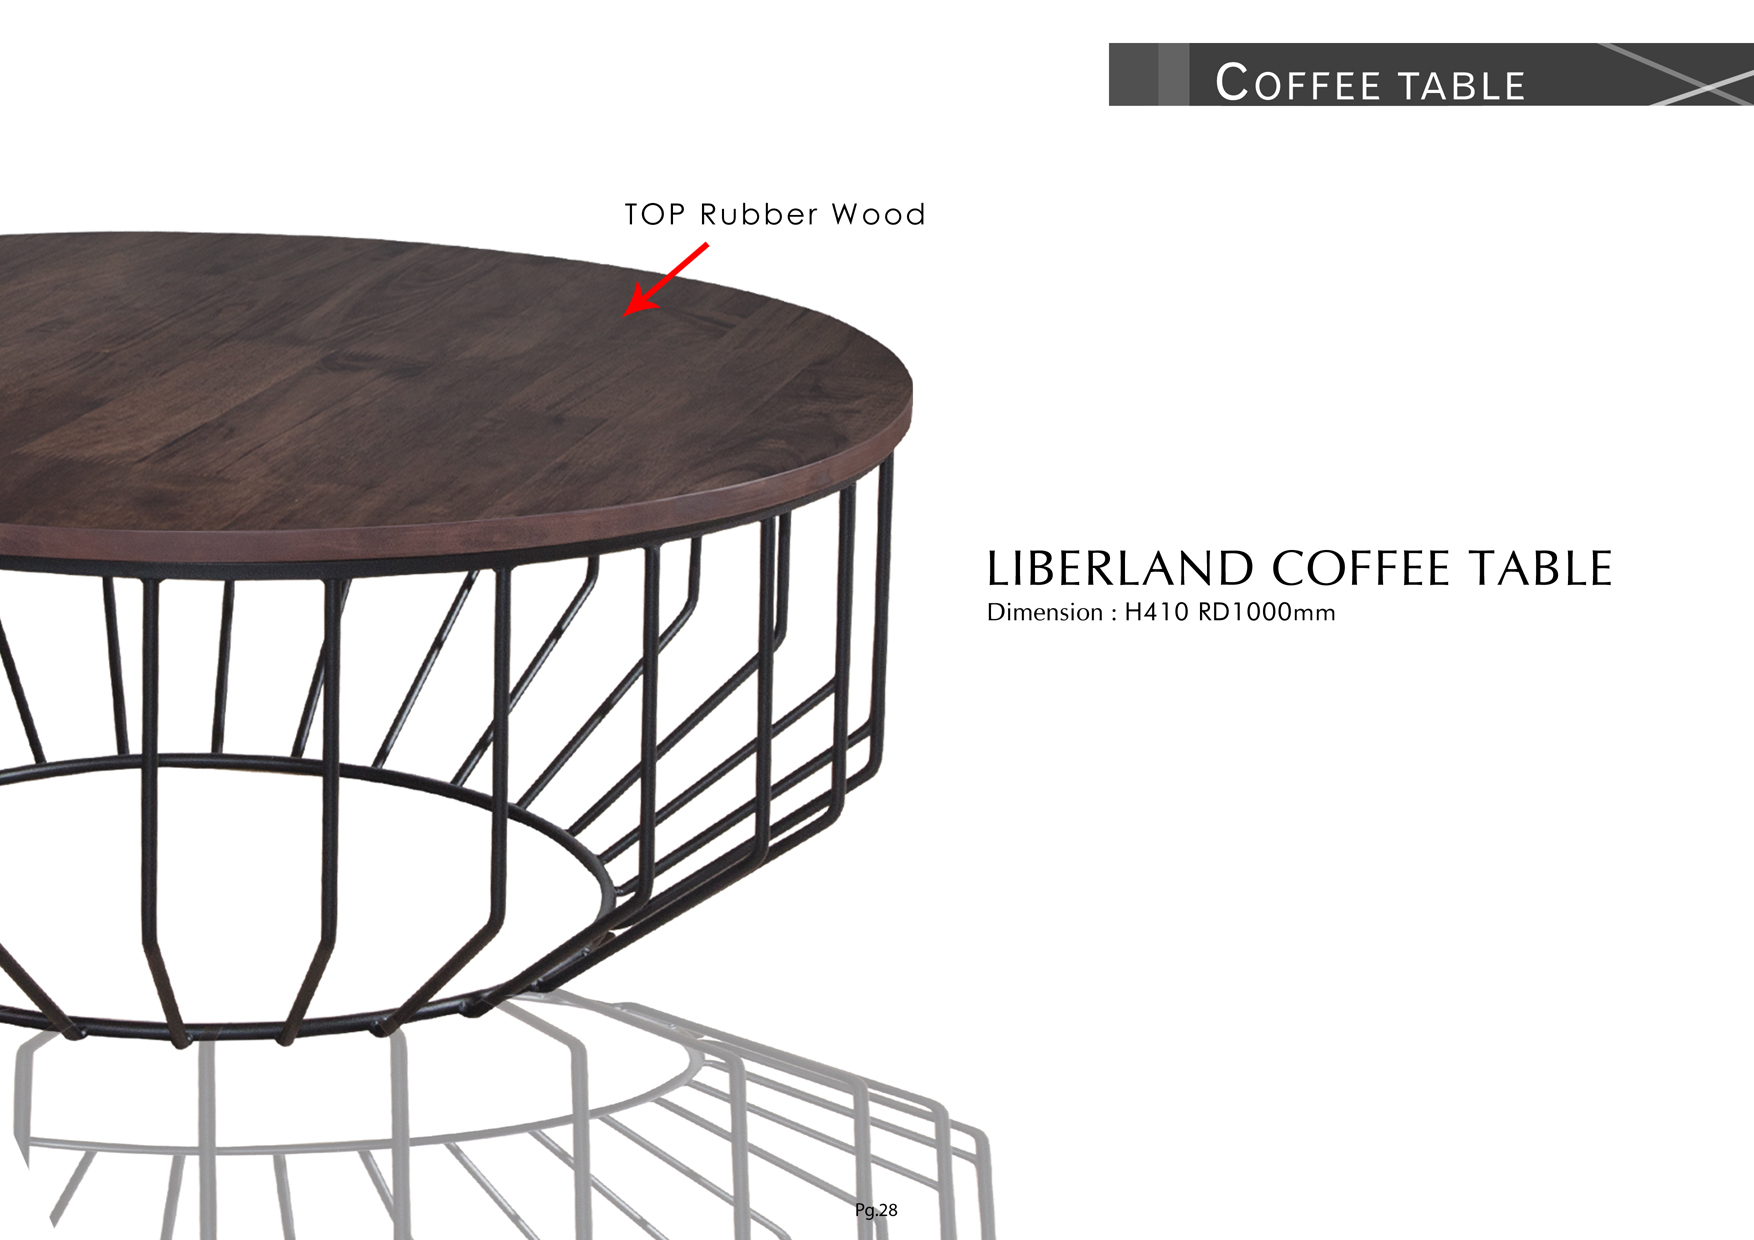 Product: PG28. LIBERLAND COFFEE TABLE